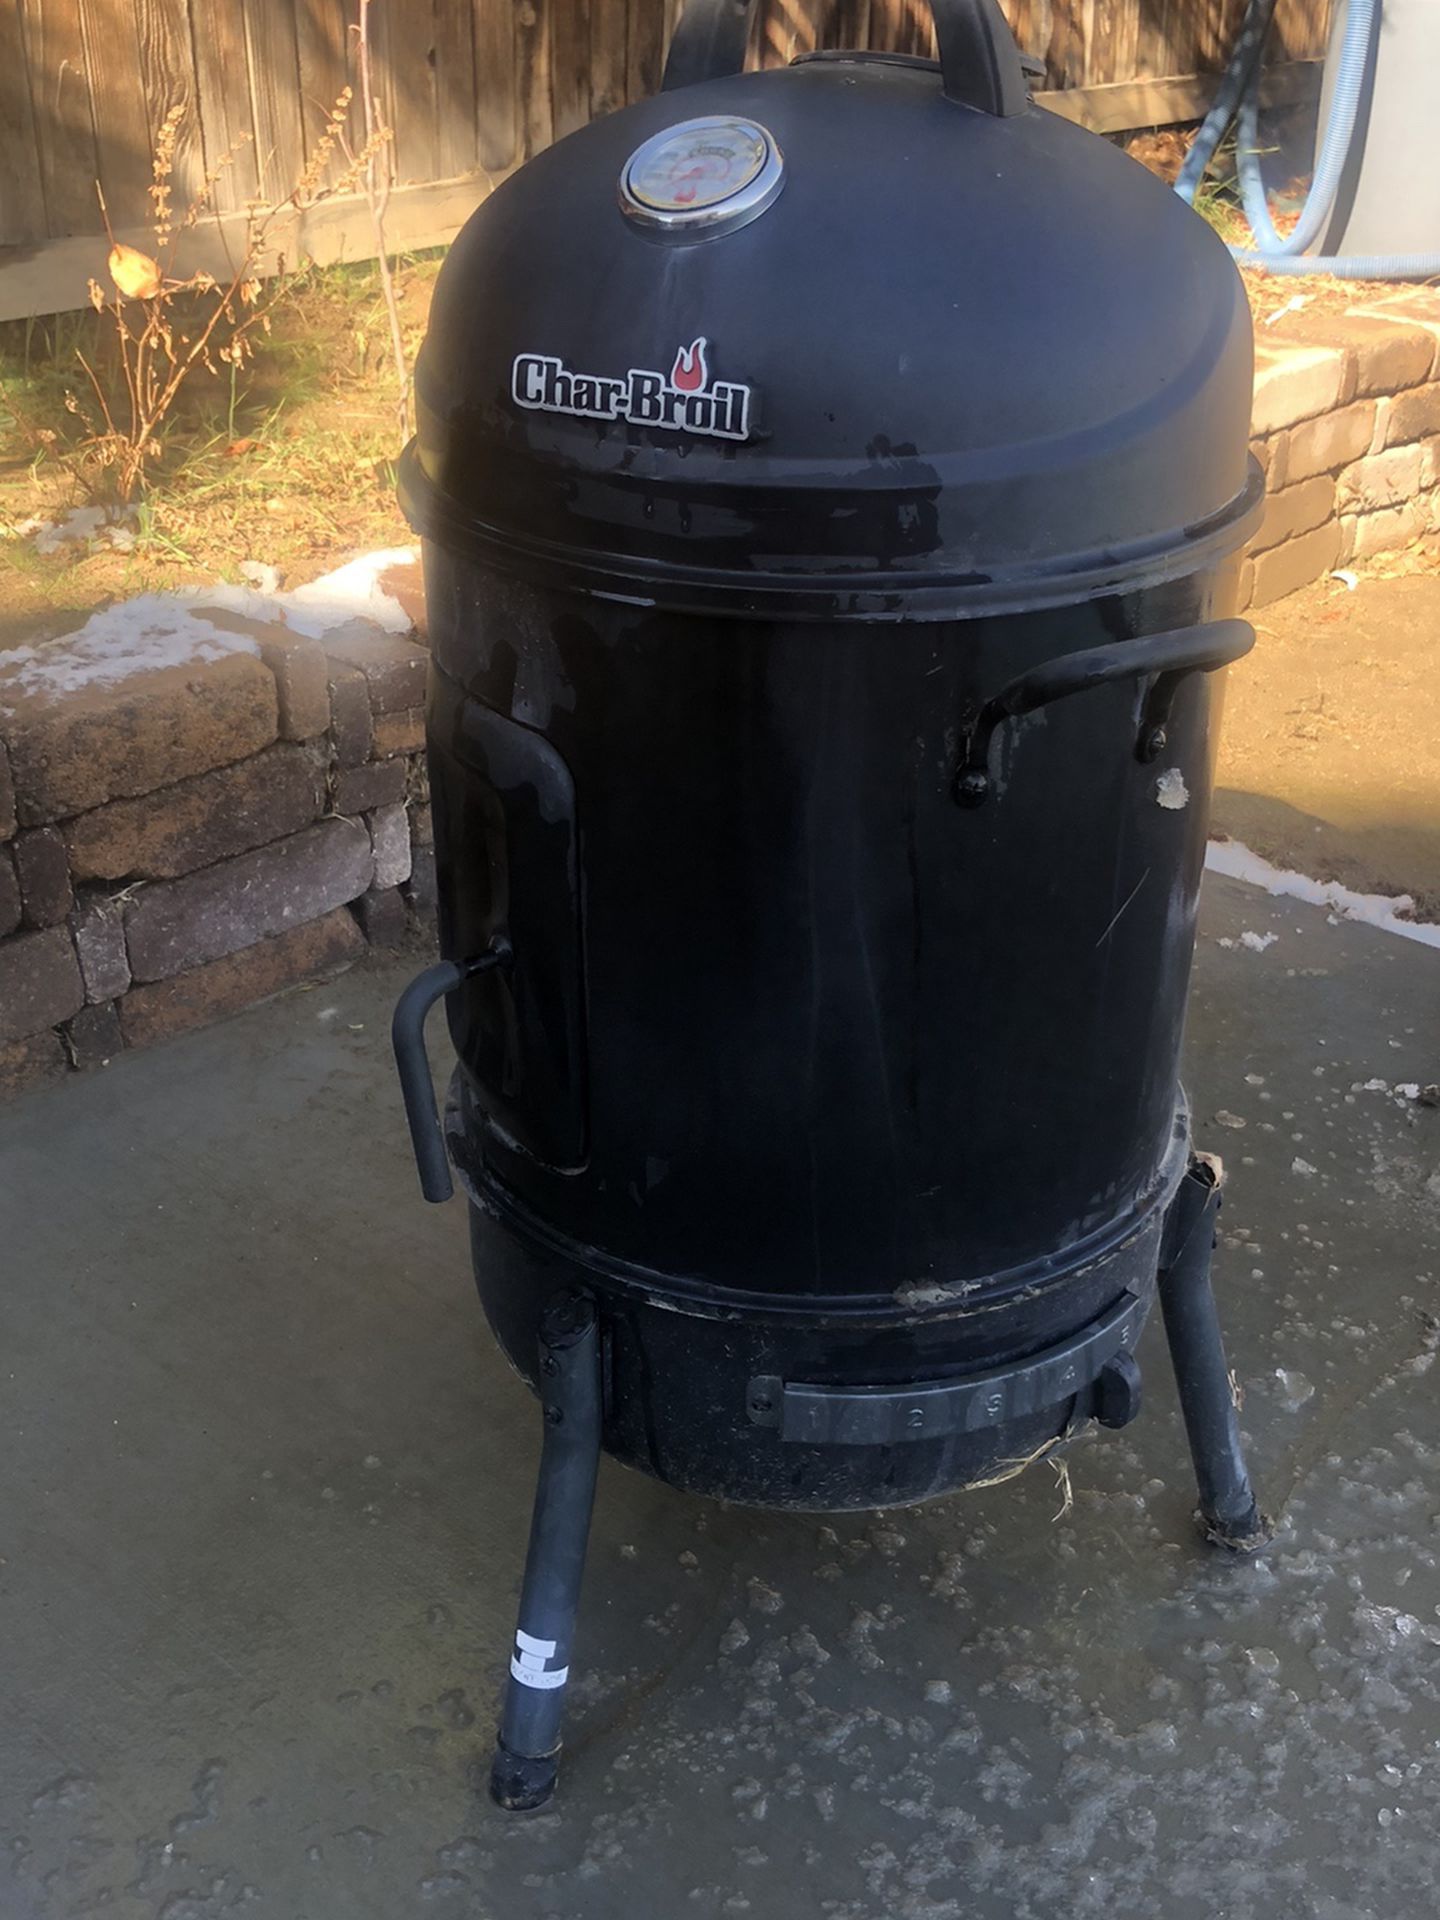 Charcoal Smoker Great Condition Used It Twice